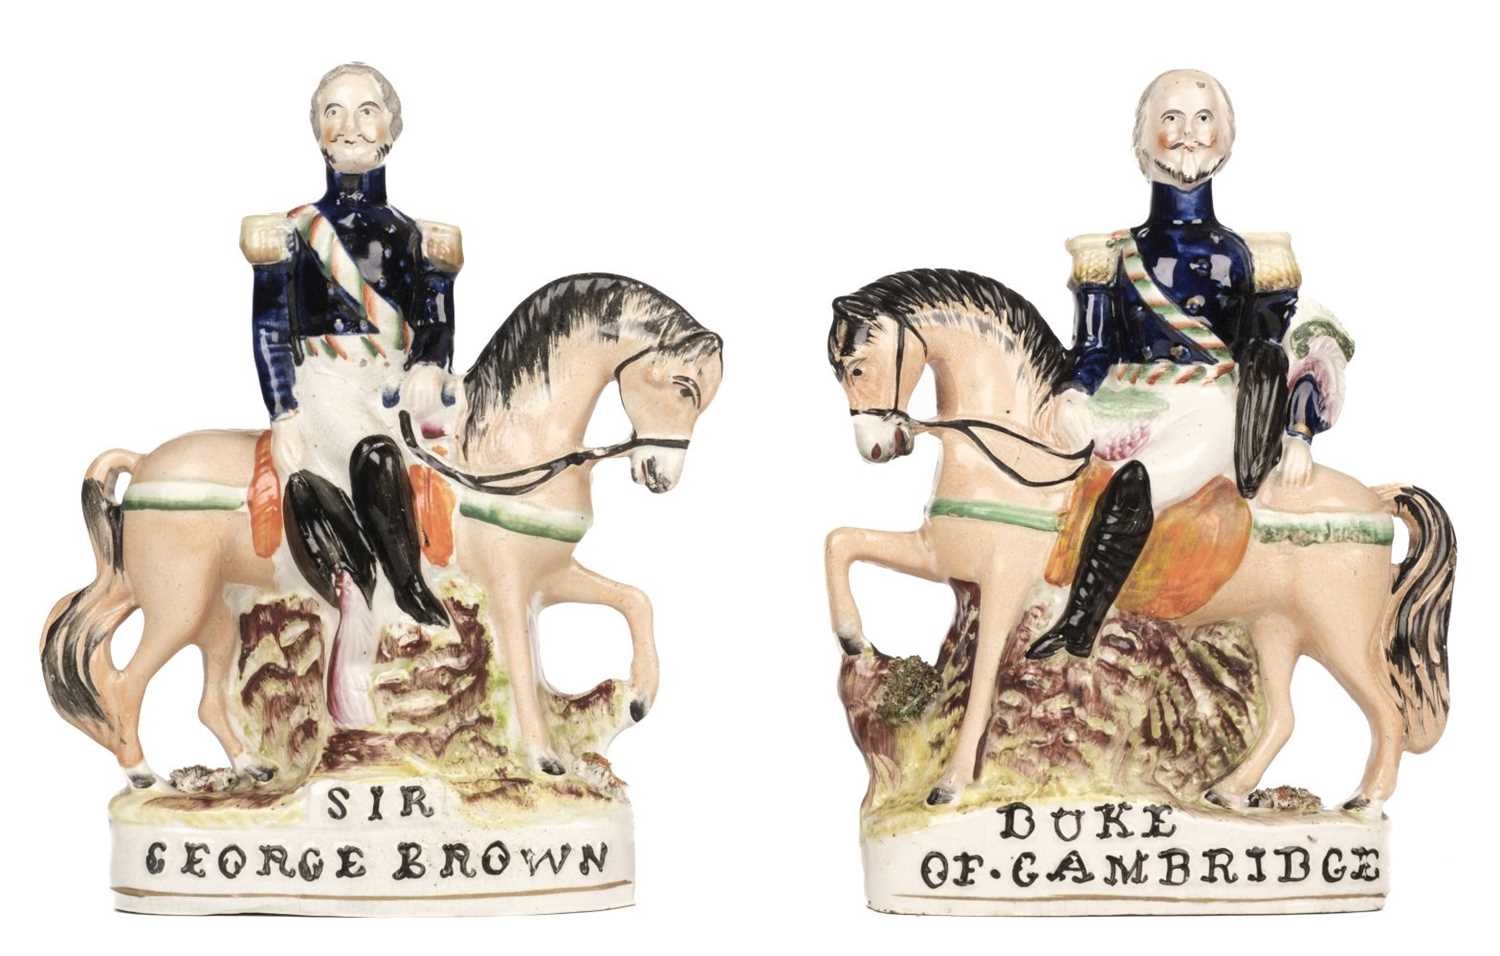 Lot 308 - Military Figures. A Victorian Staffordshire Sir George Brown and Duke of Cambridge